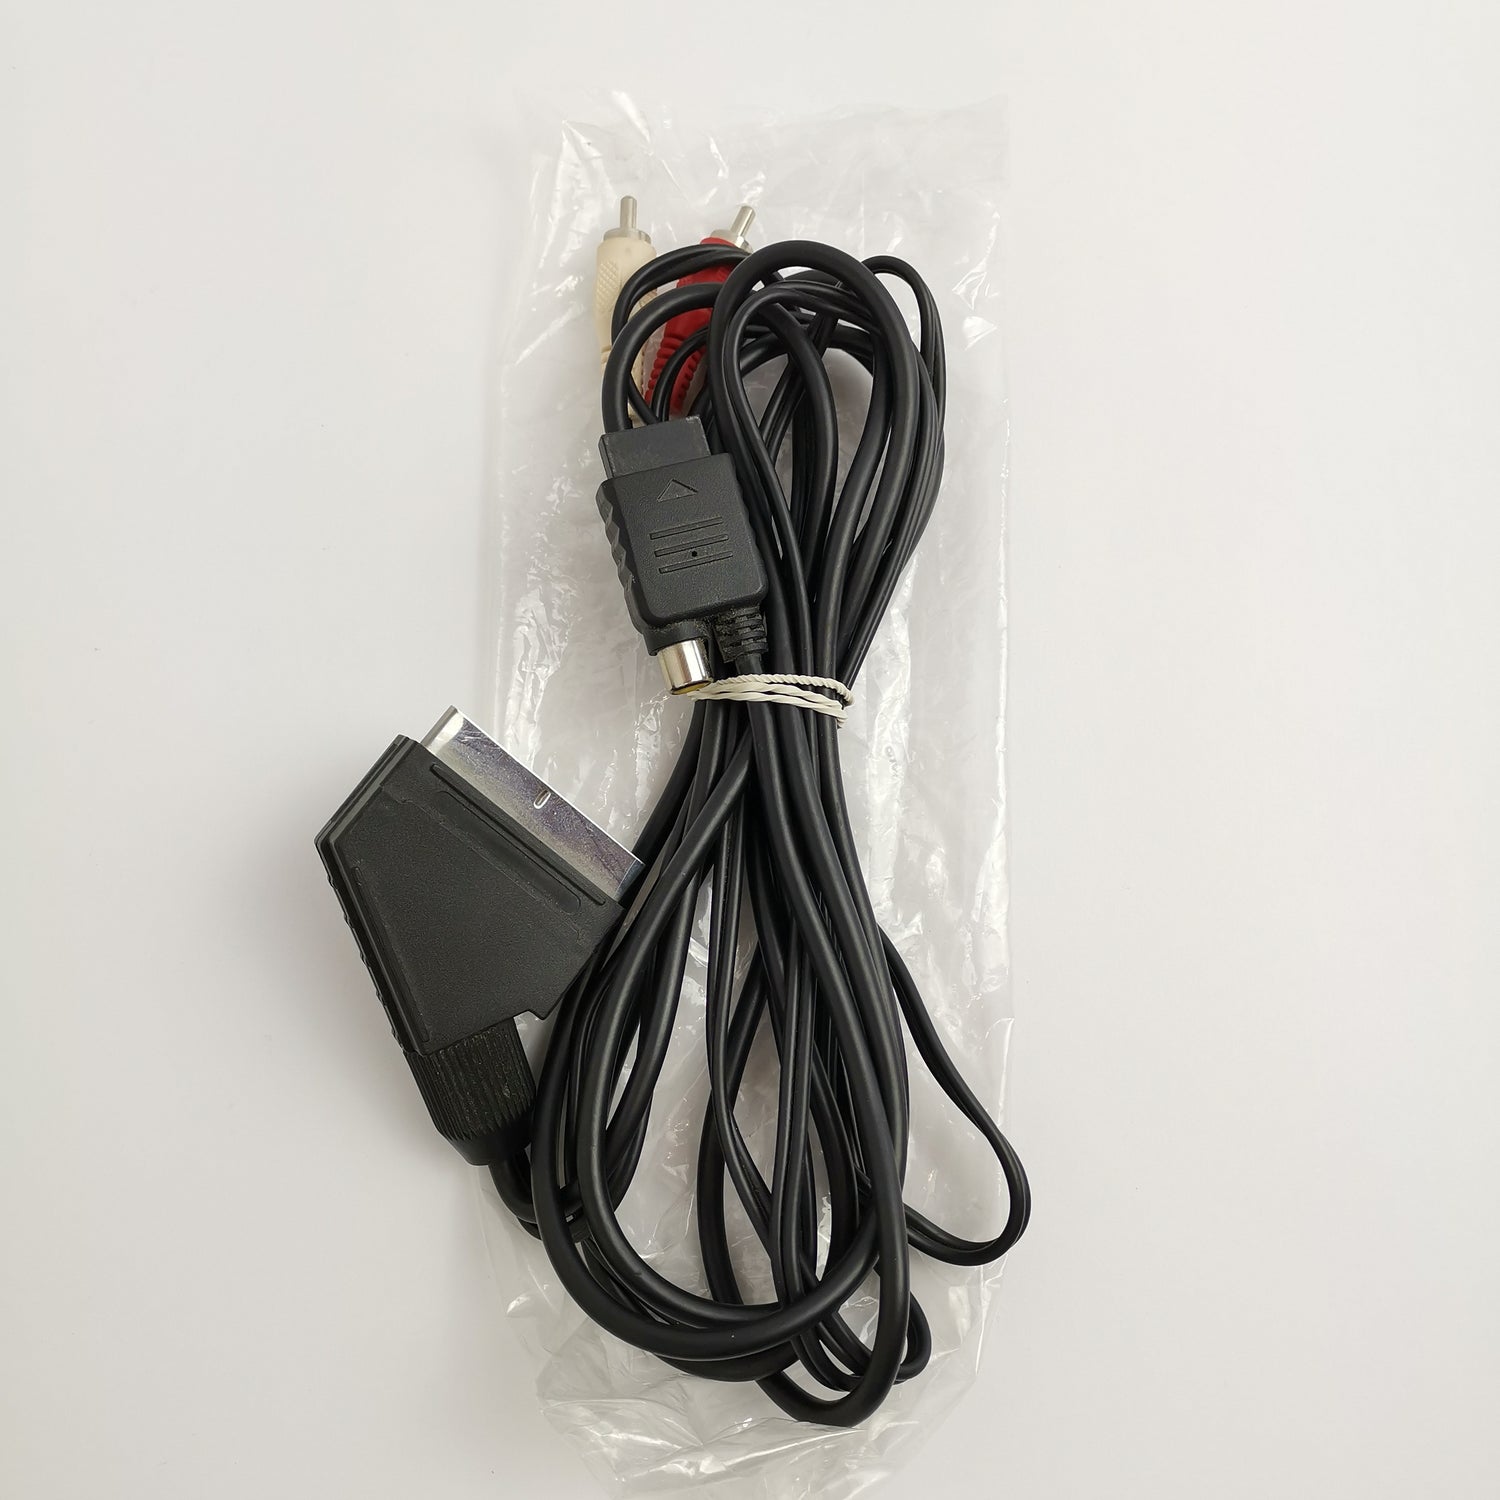 Sony Playstation 1 Zubehör : RGB Scart x 2 Audio Cable Kabel | PS1 PSX - OVP